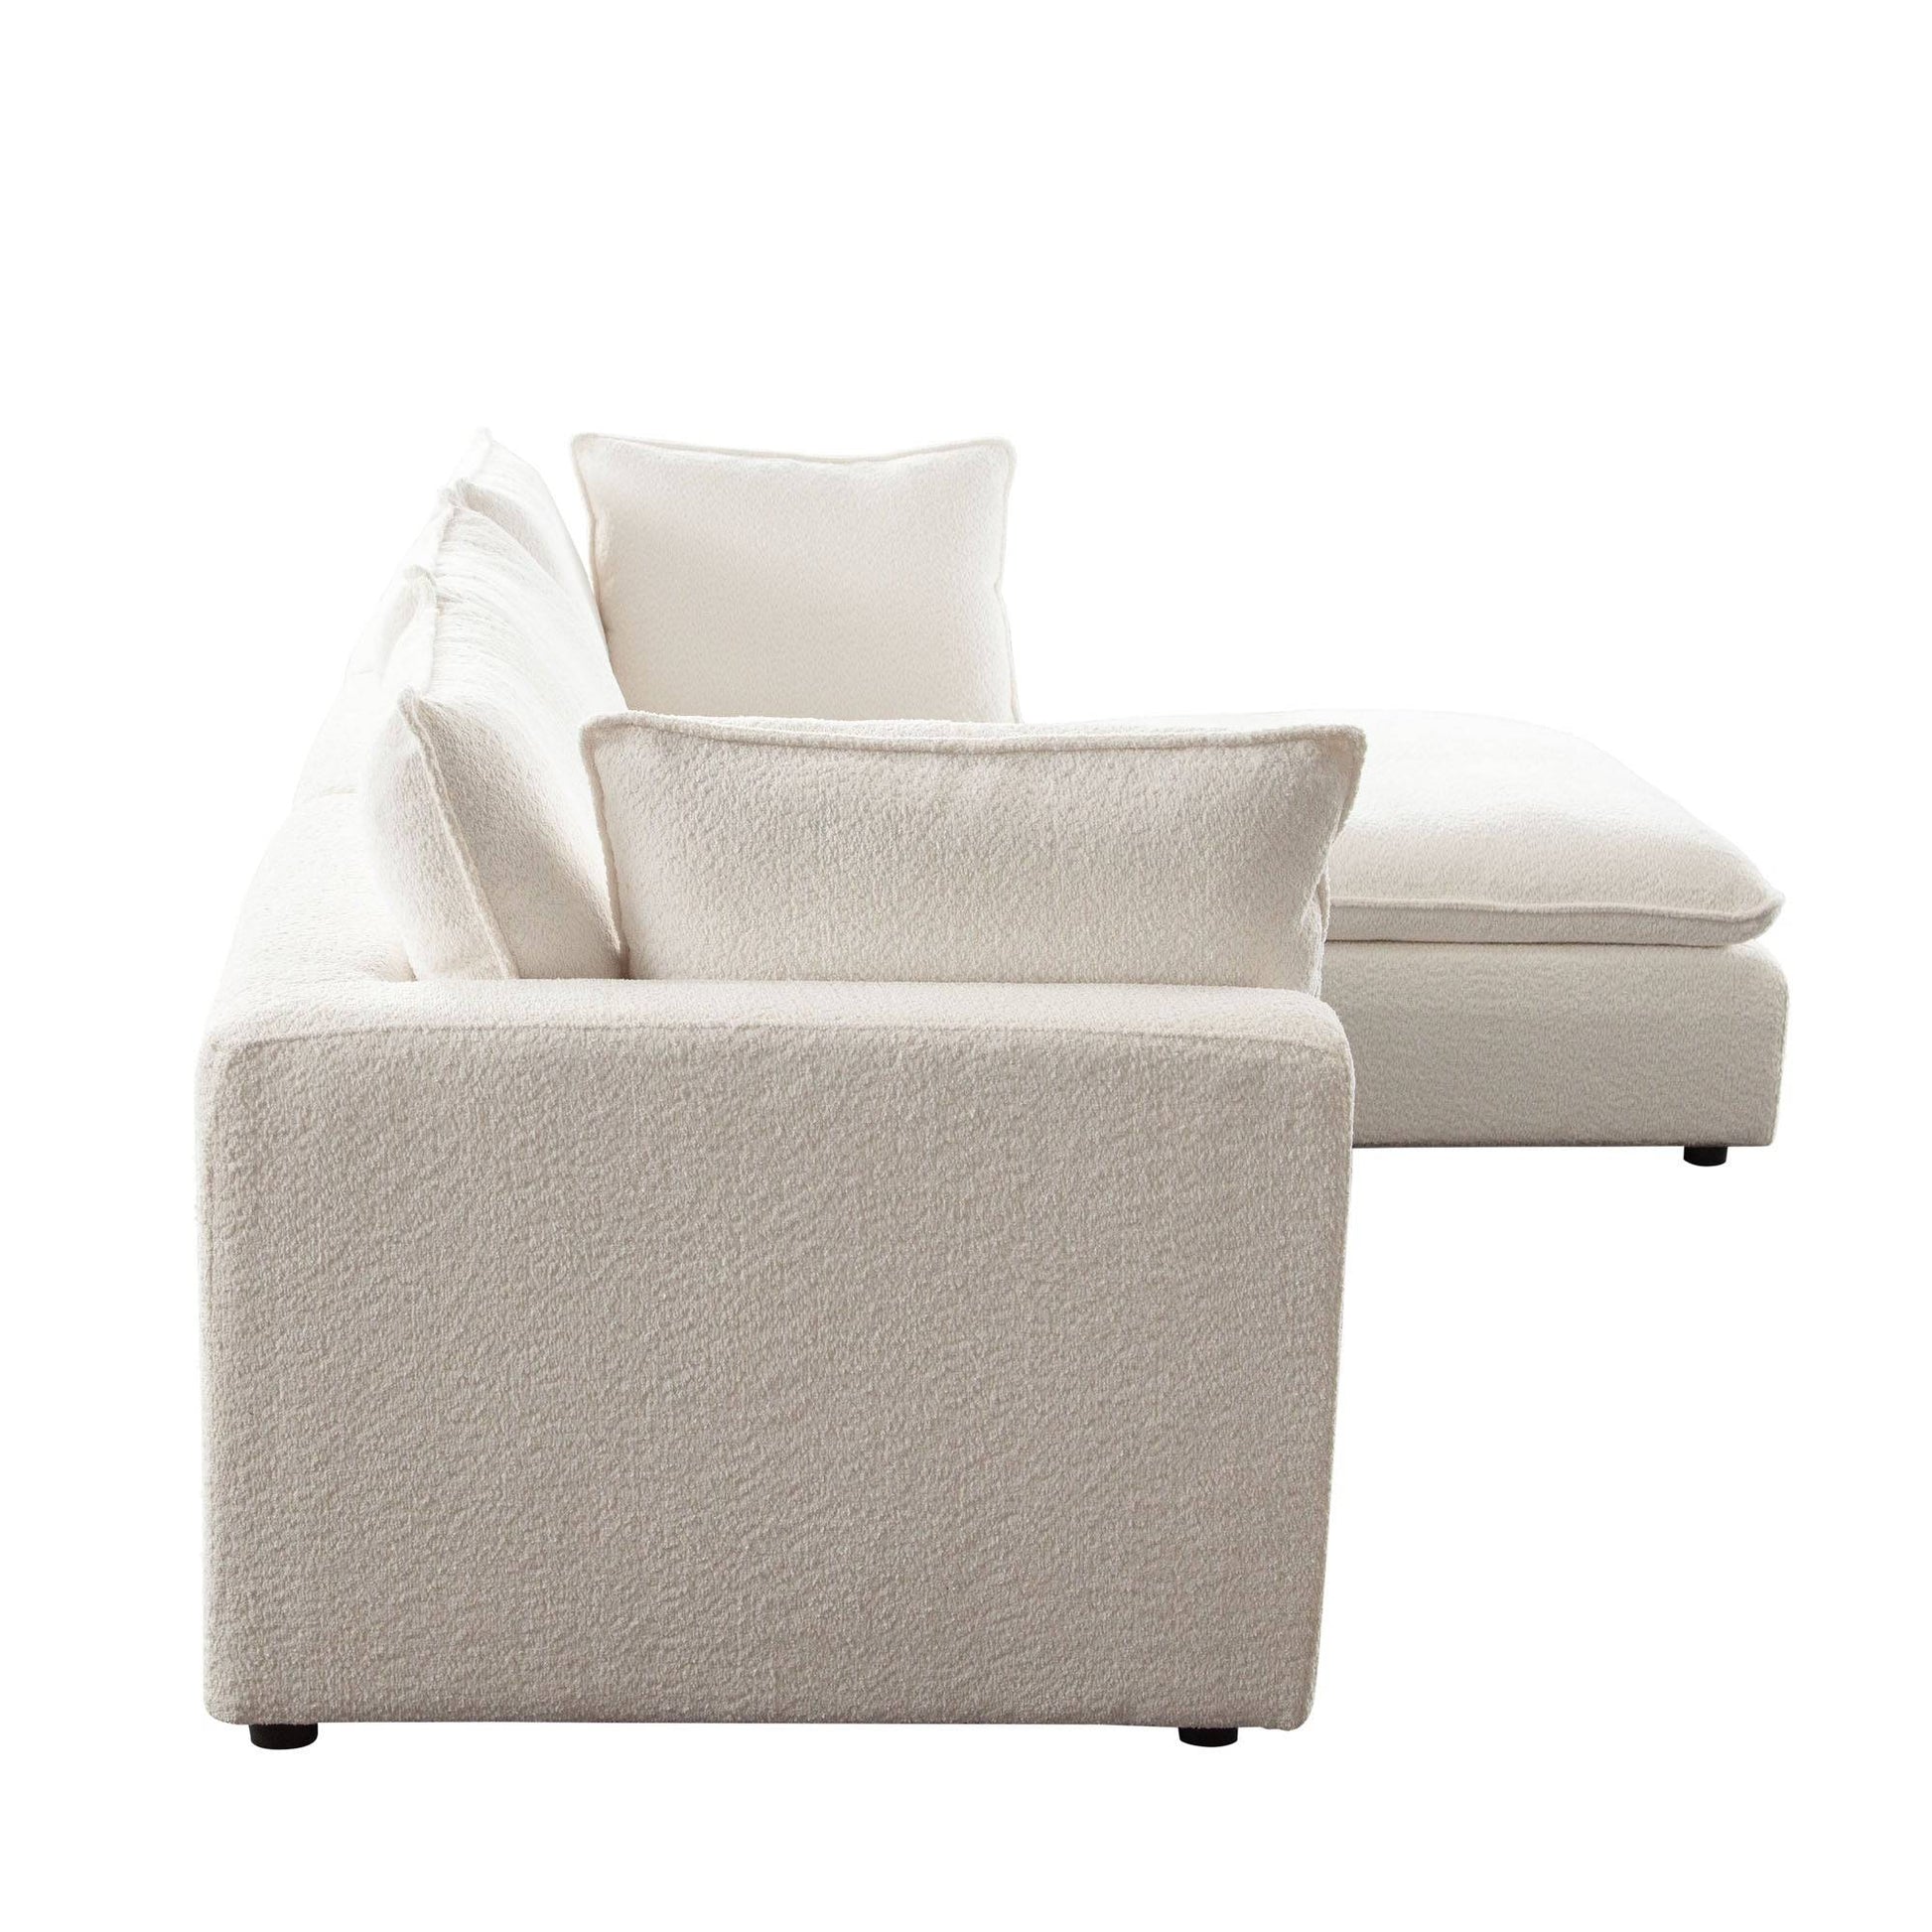 Ivy 4-Piece Reversible Modular Chaise Sectional in White Faux Shearling w/ Feather Down Seating - Elite Maison